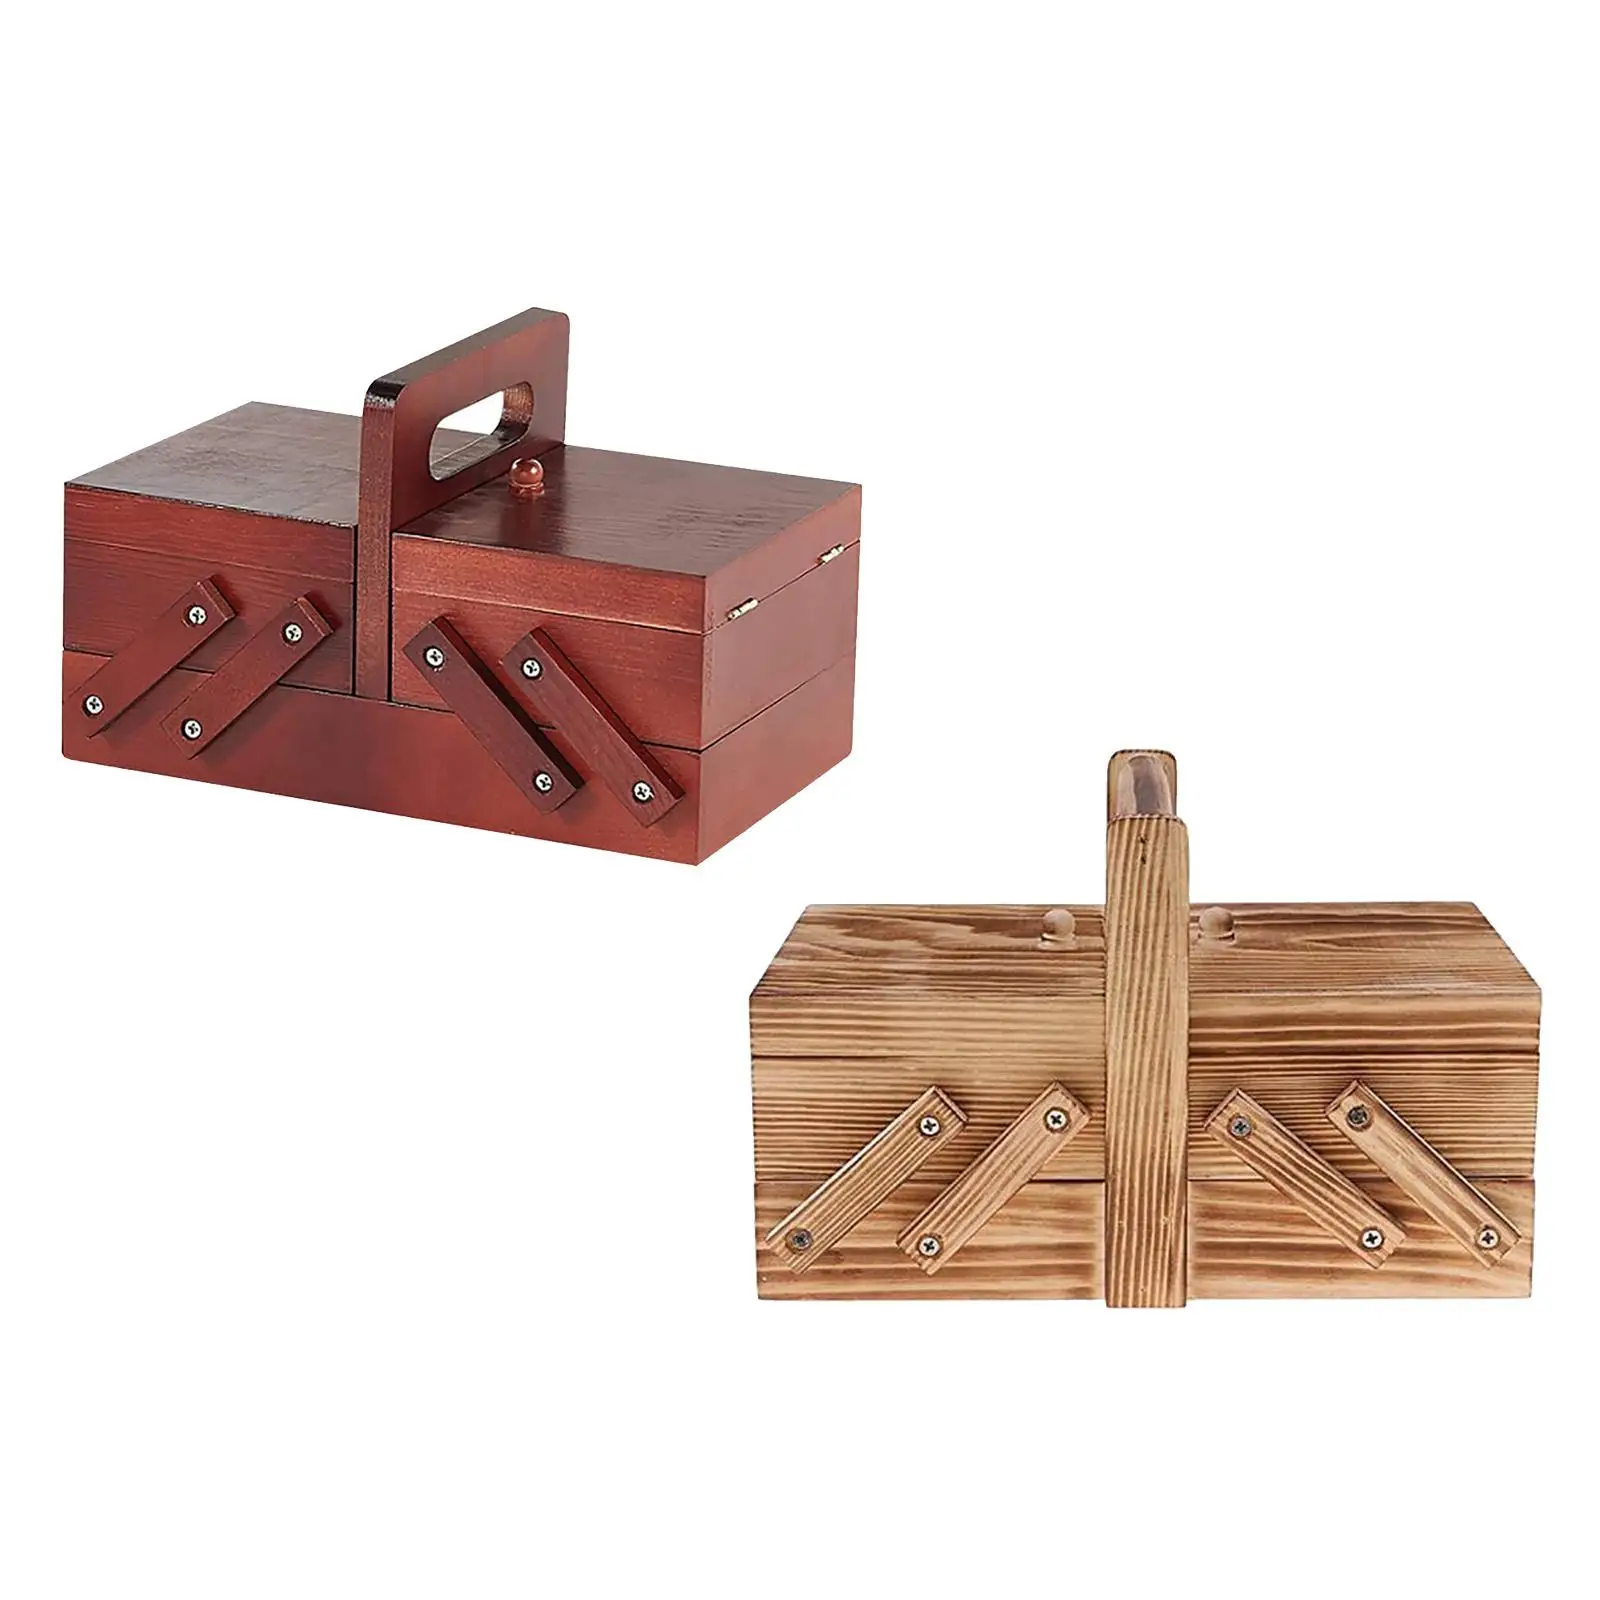 Wooden Sewing box  Thread Scissors Stitching Sew Basket Organizer Jewelry Boxes Sewing Supplies Household for Beginners